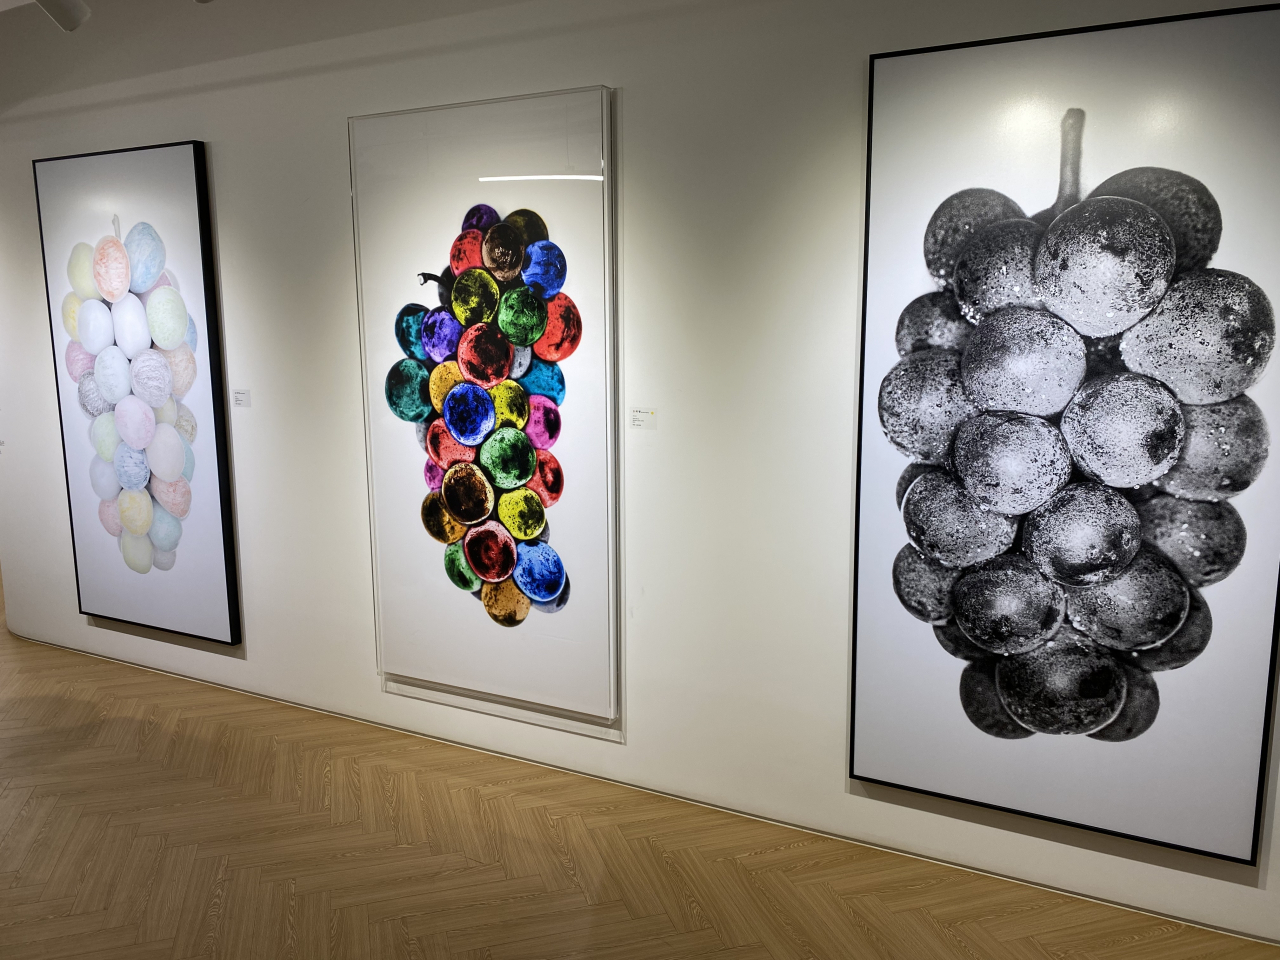 Display of grape-themed works by photographer and painter Koh Yeo-myoung at exhibition 